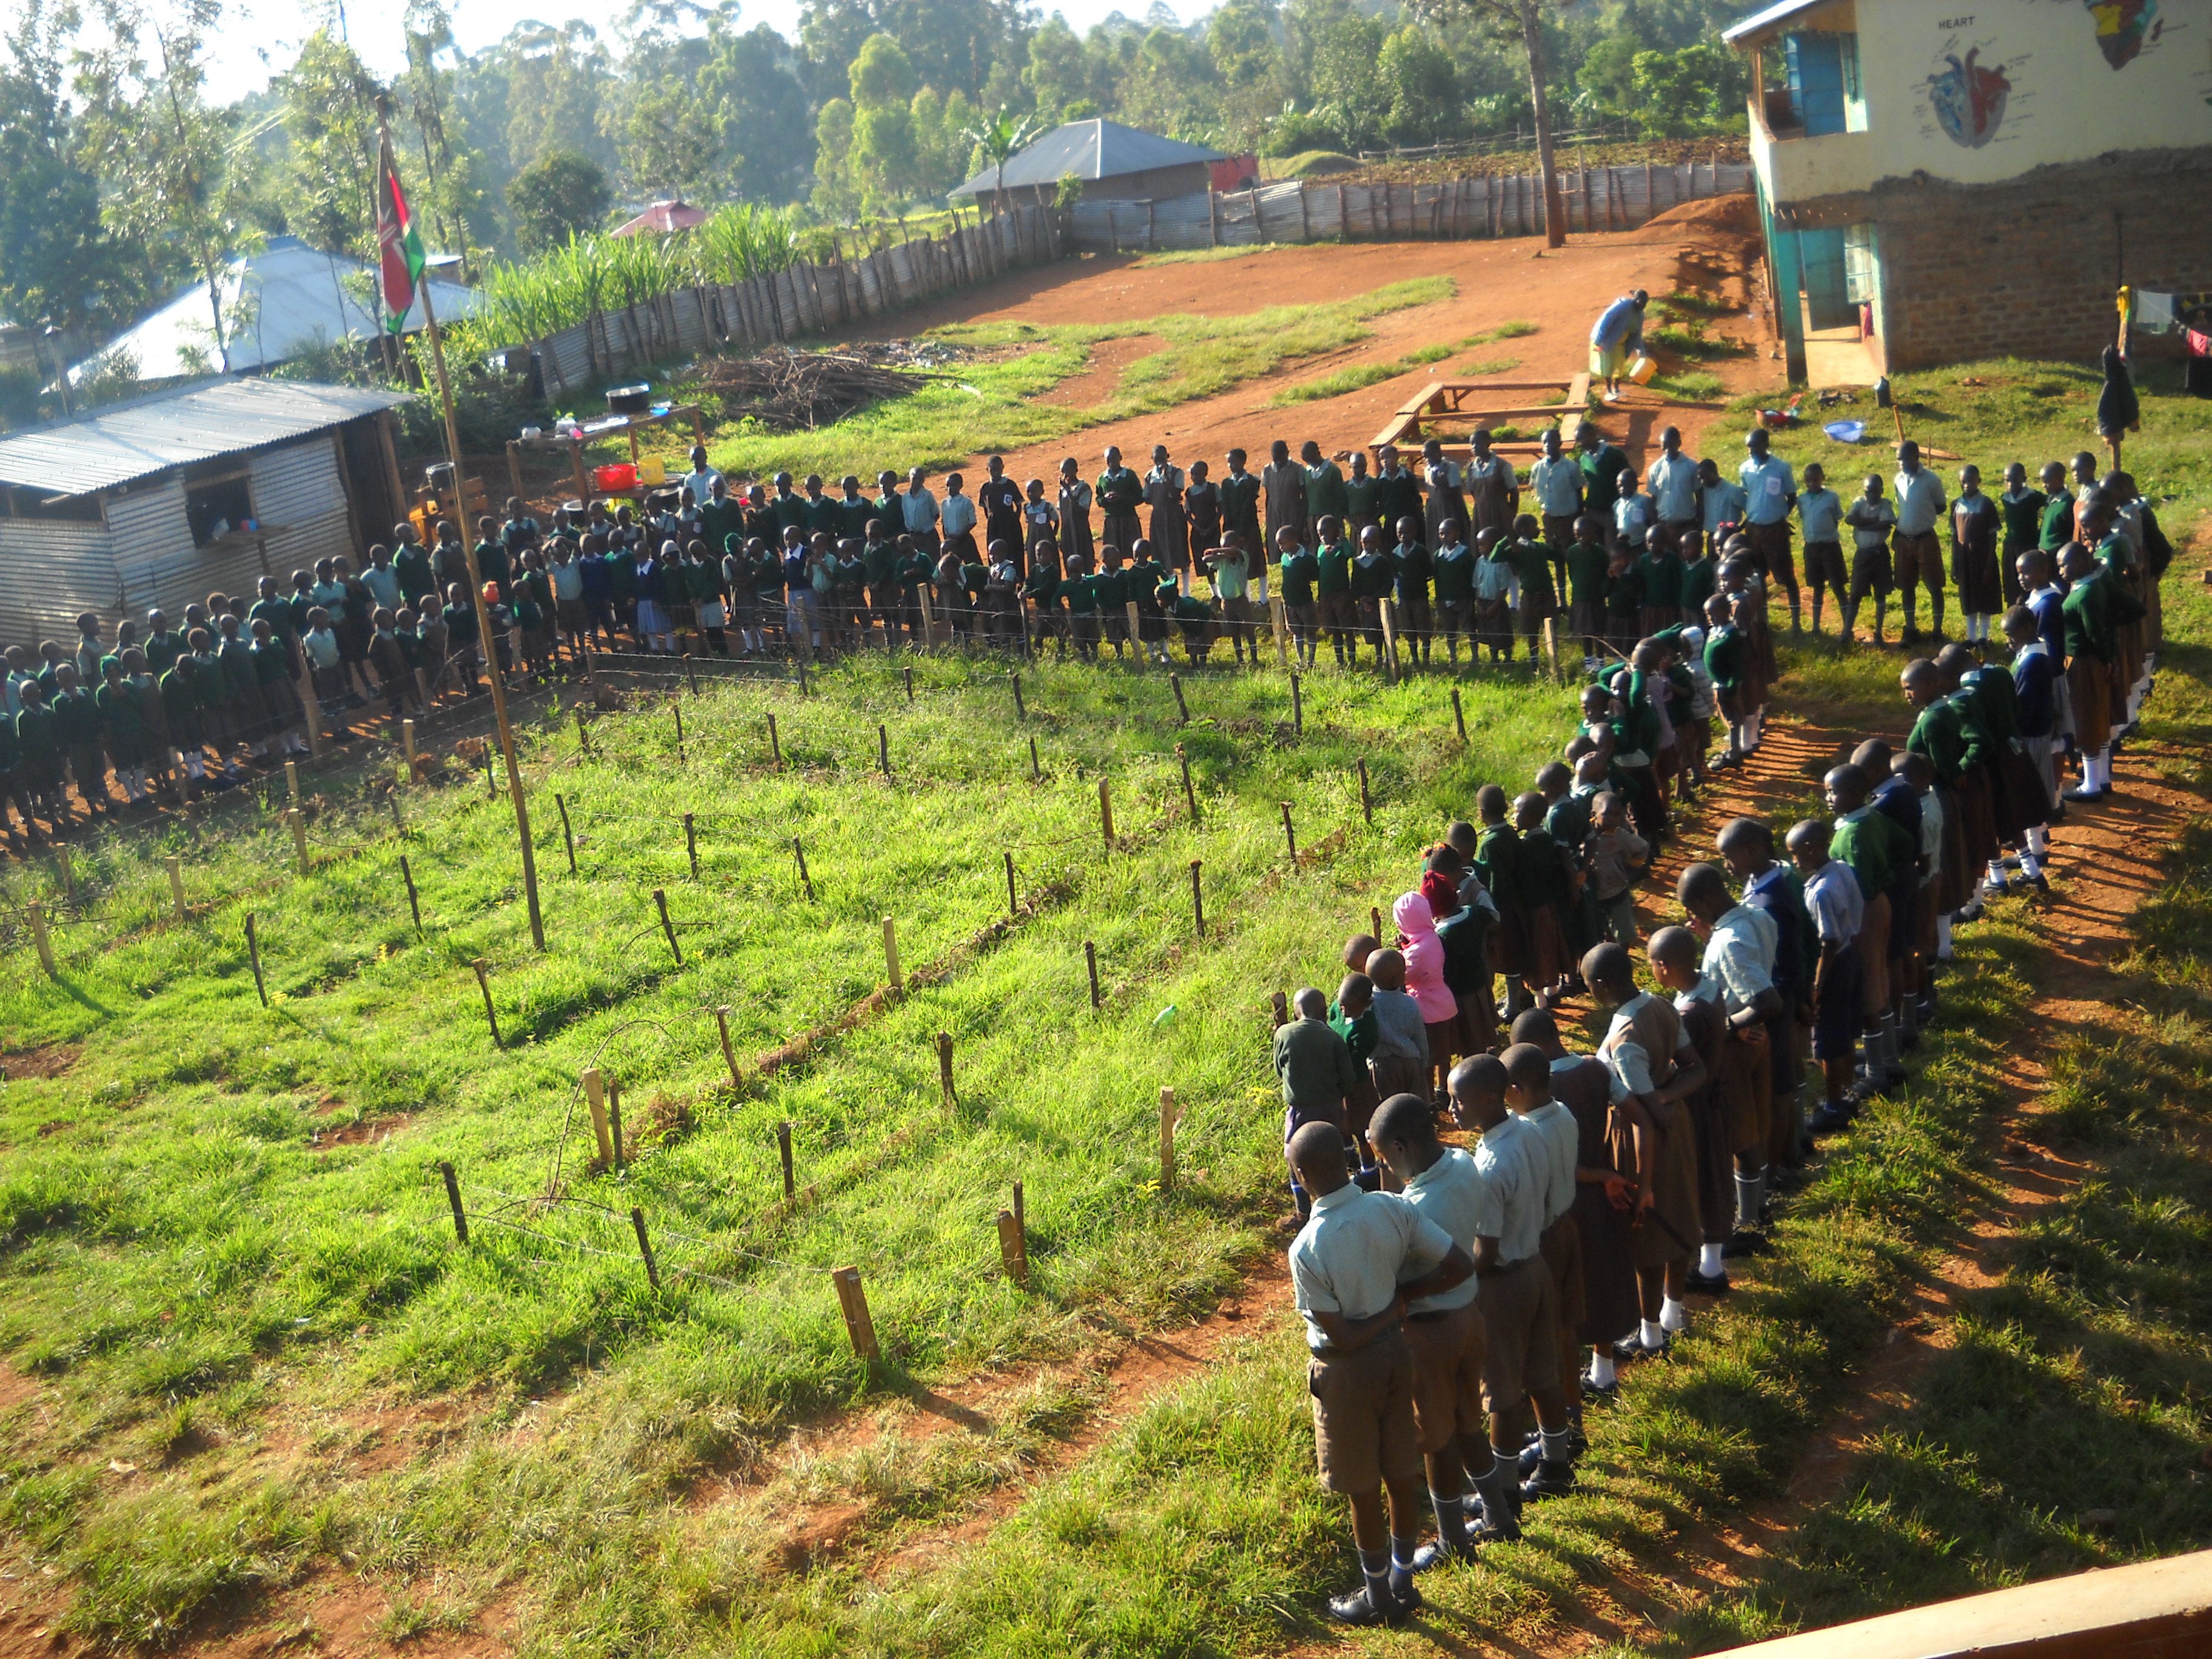 Buy adjoining land and expand the school to meet the Kenyan Ministry of Education requirements for a primary school.